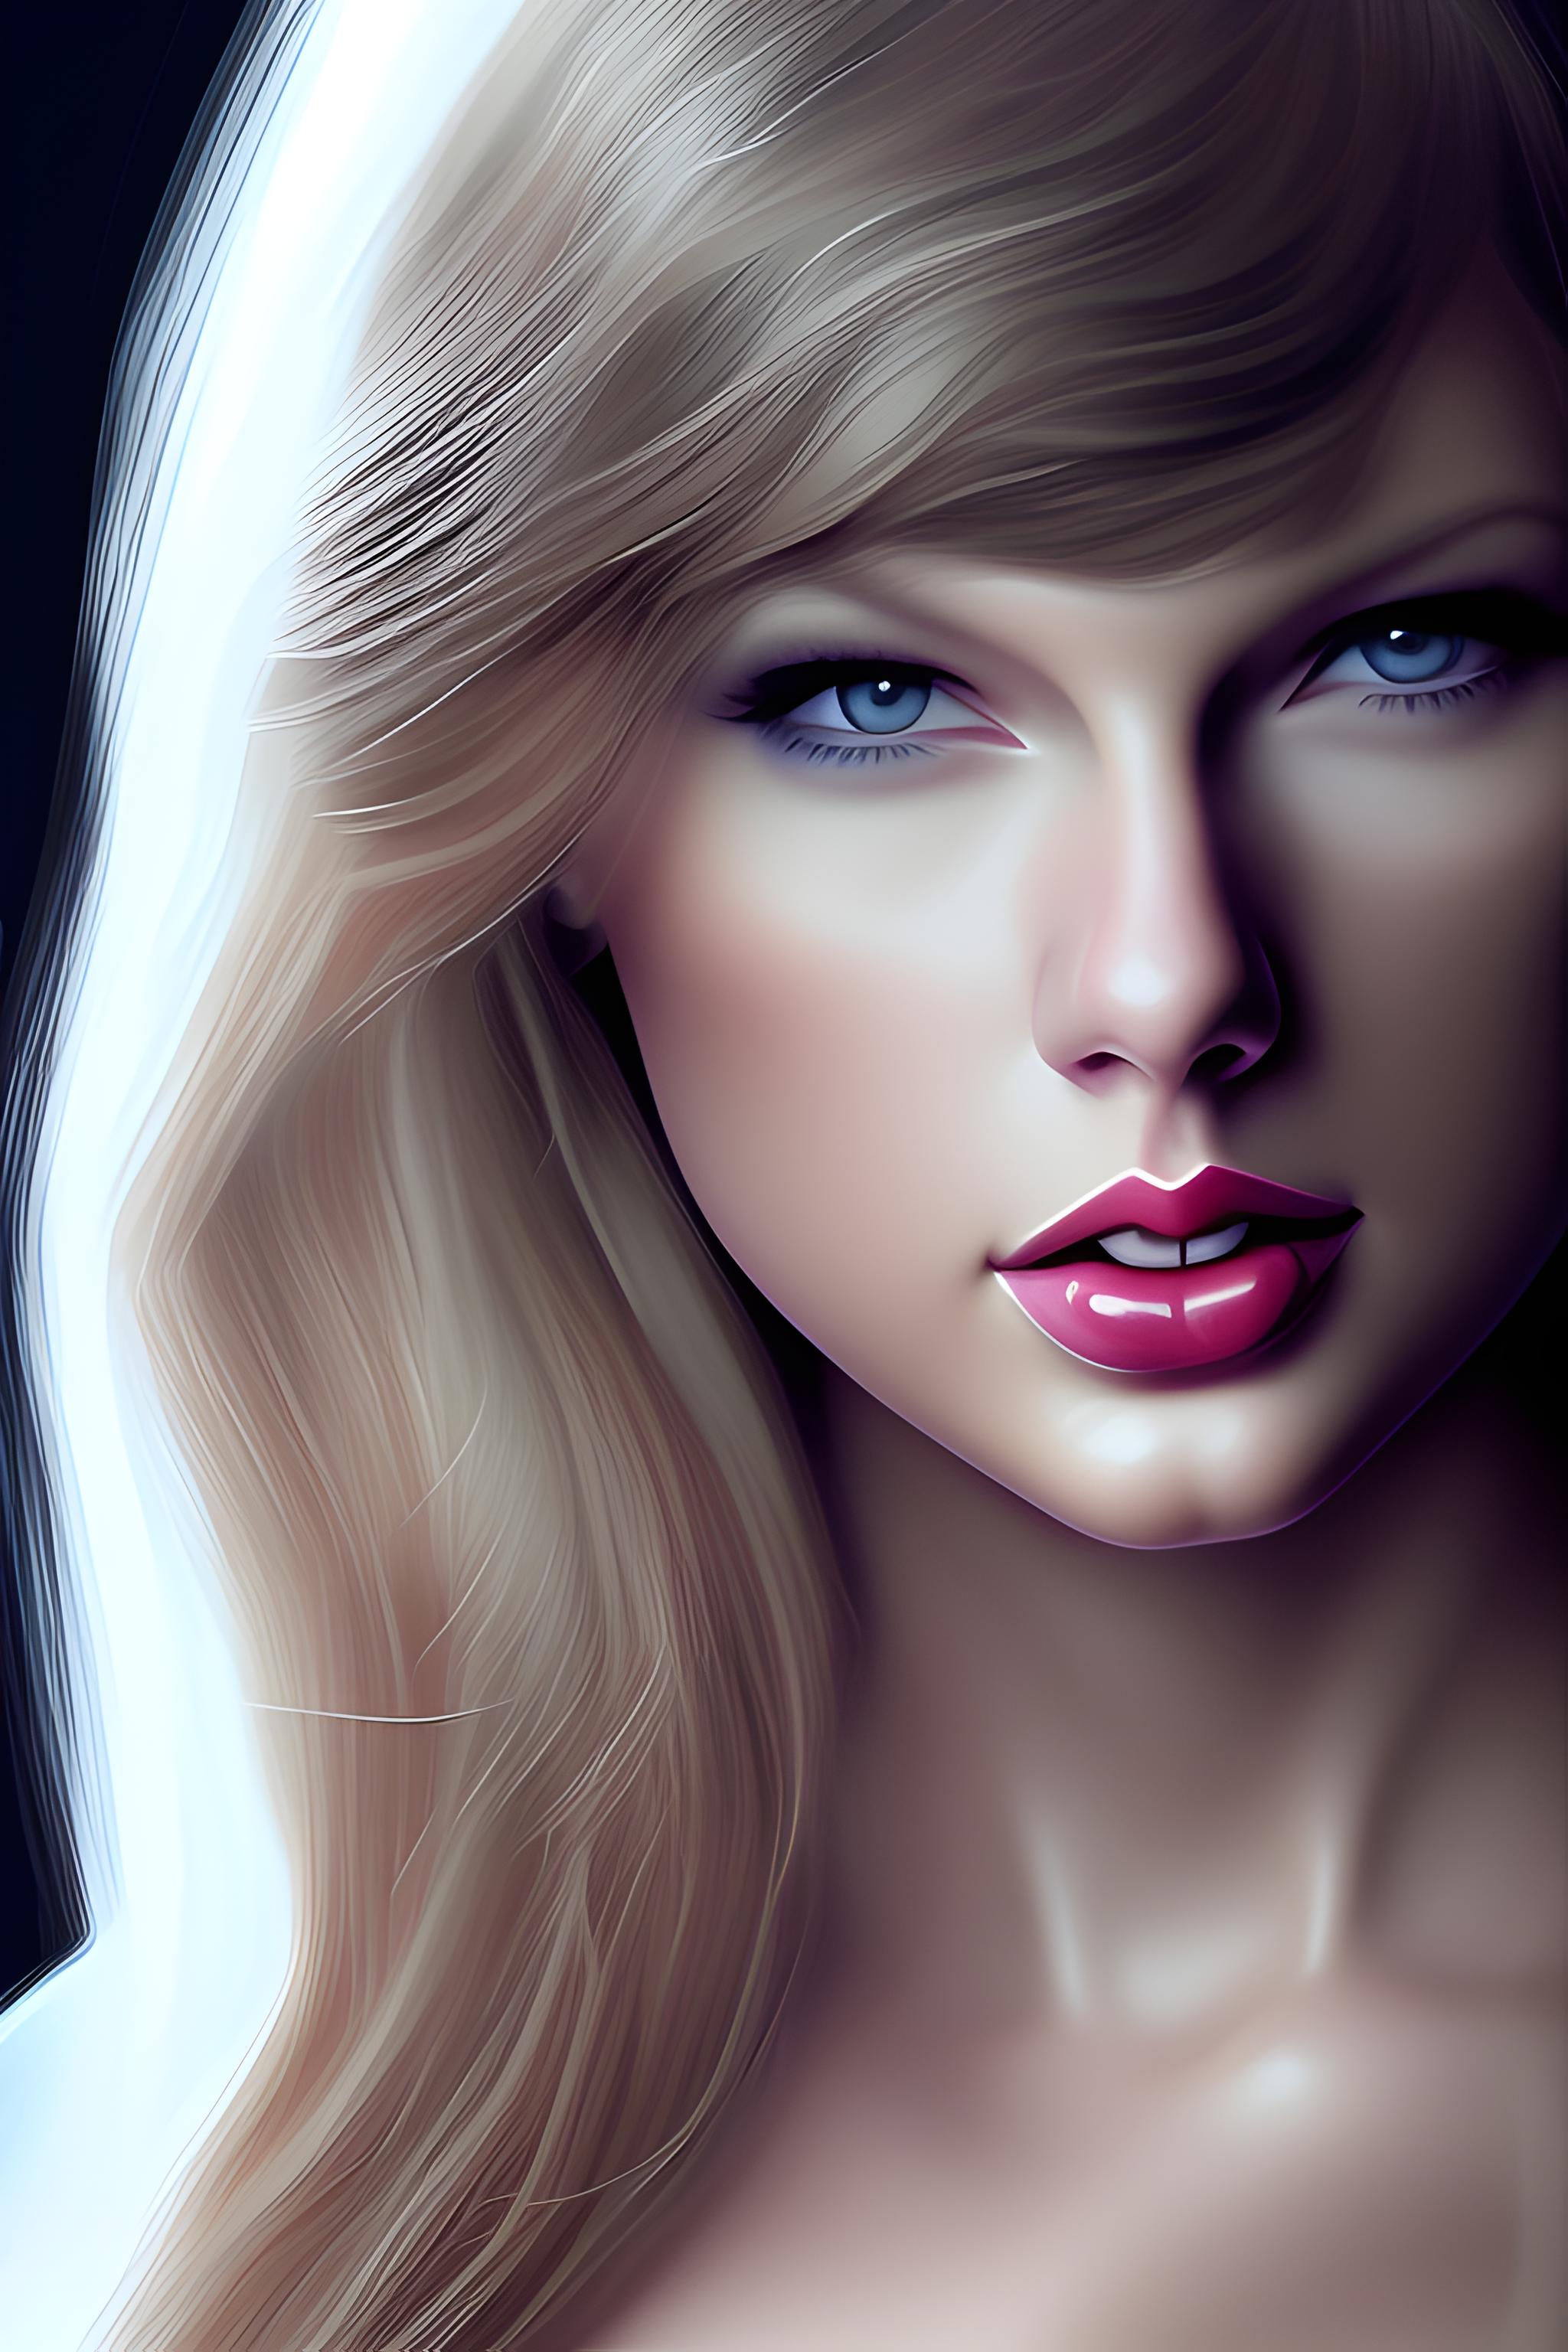 Taylor swift nude | Wallpapers.ai